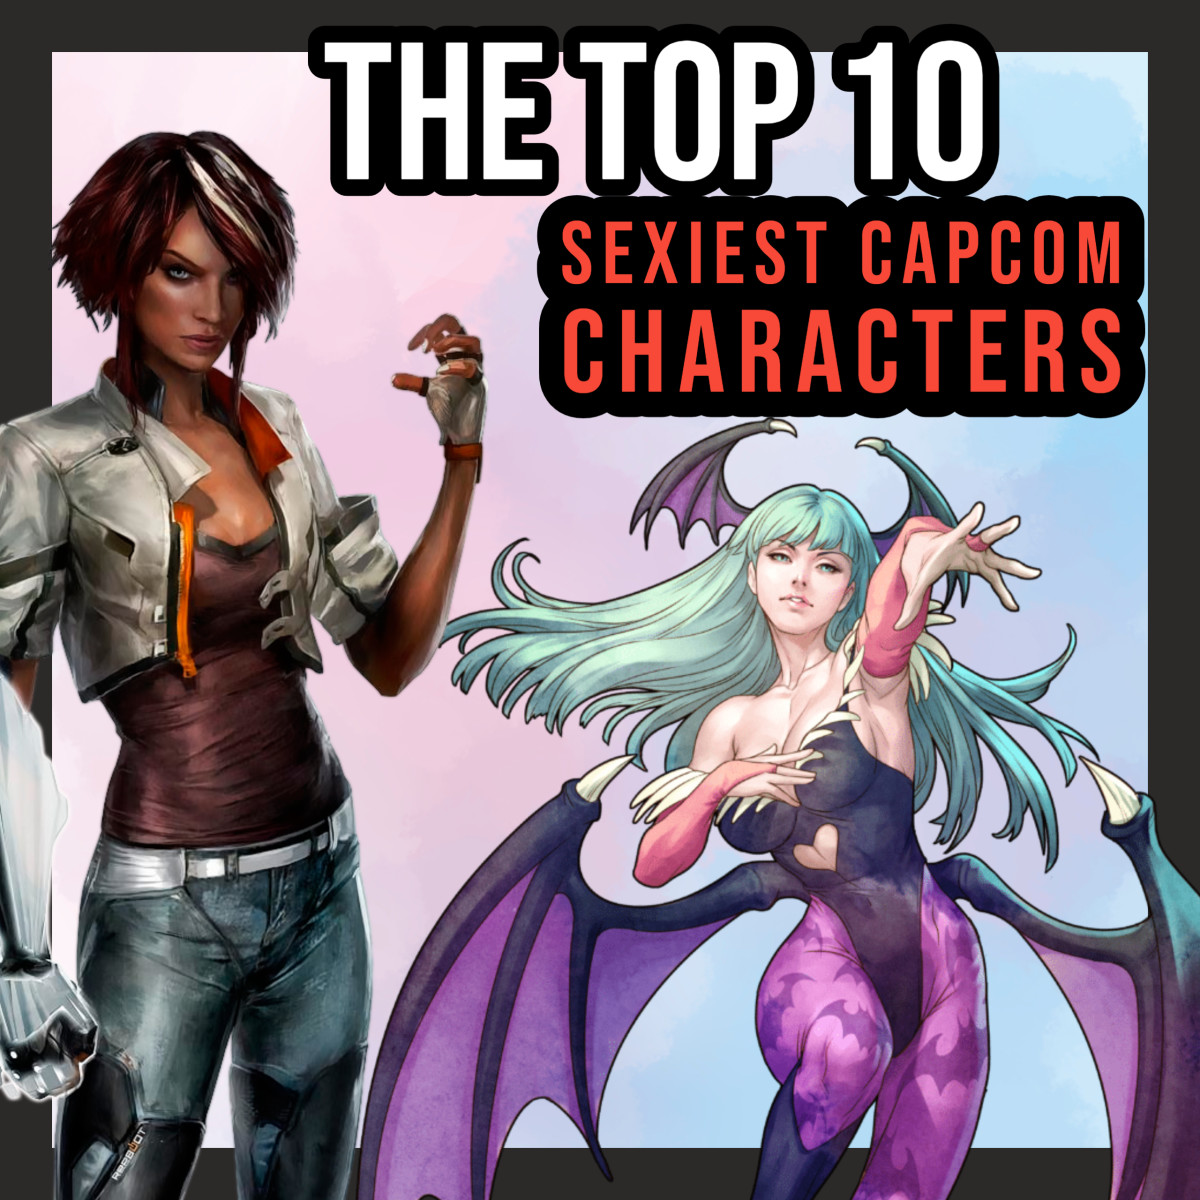 The Top 10 Sexiest Capcom Characters